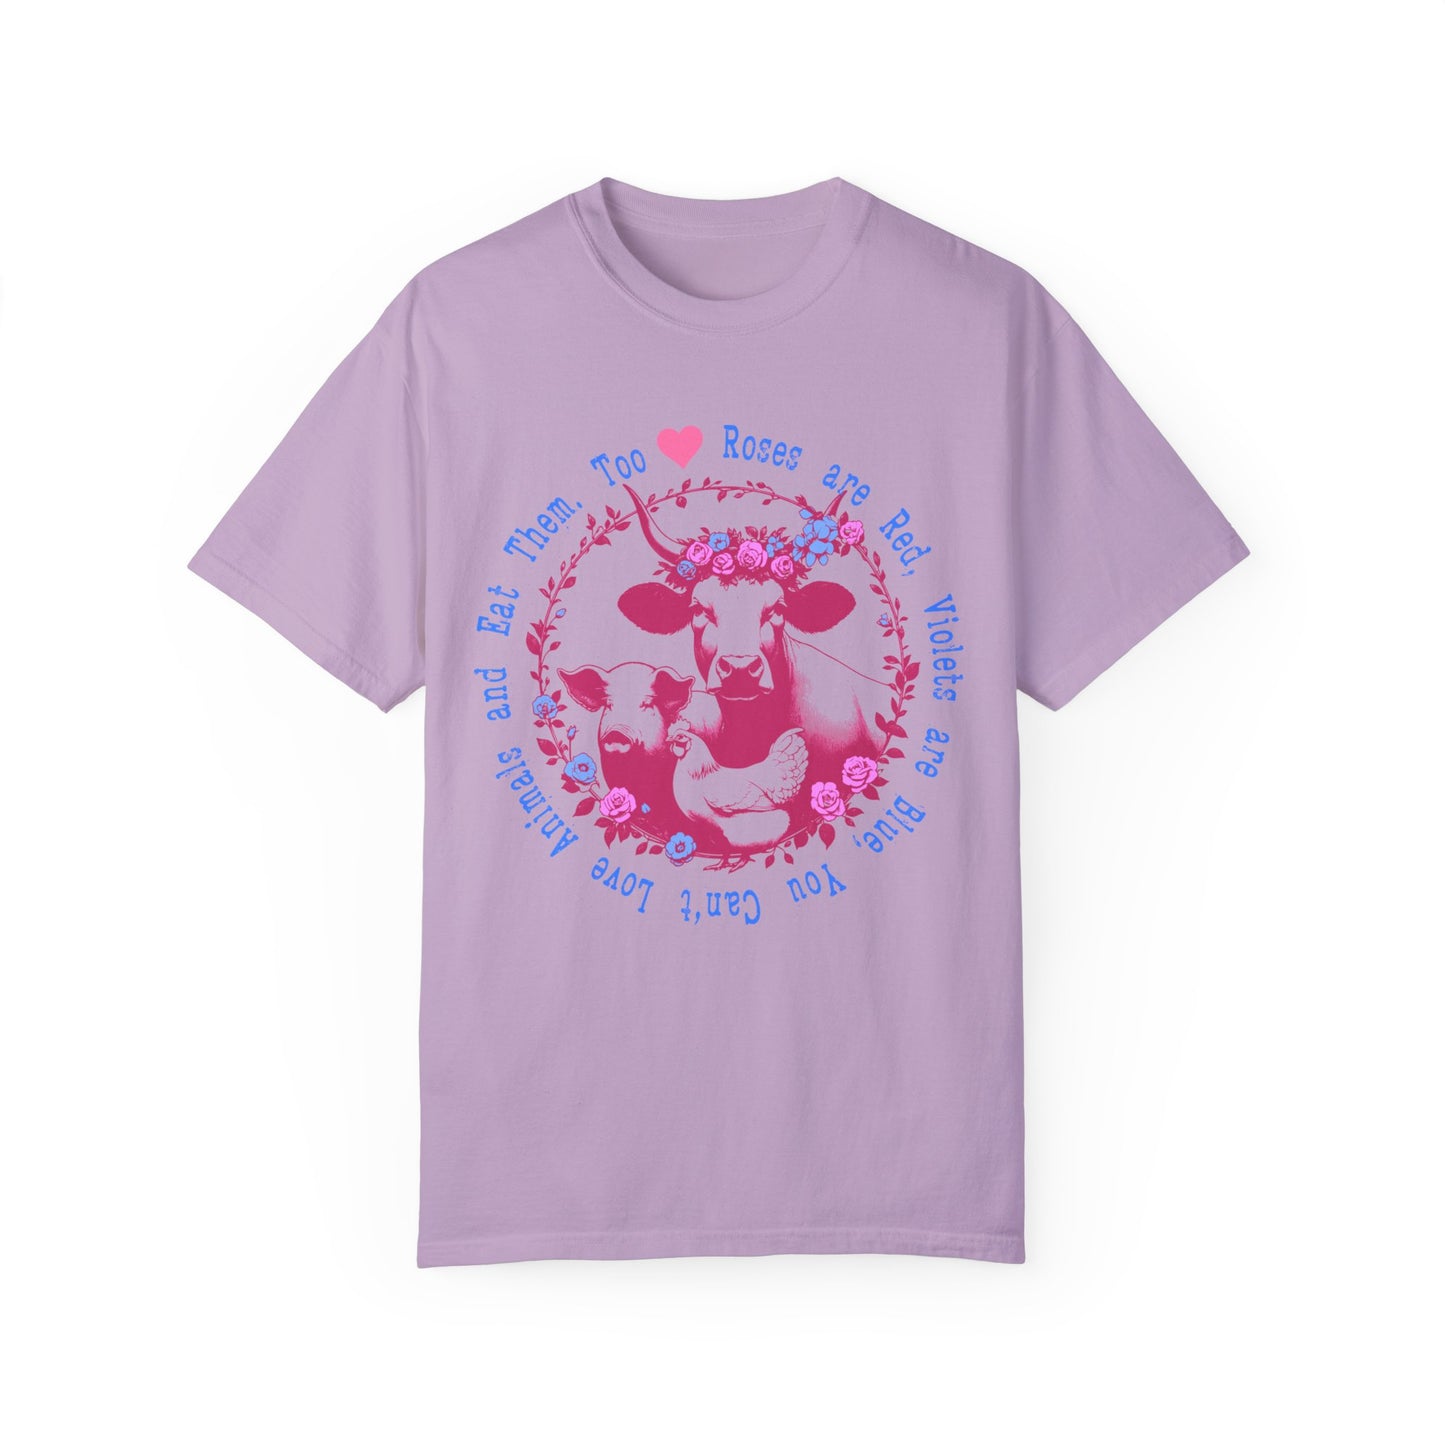 Roses are Red Vegan T-shirt in Bright Colors {Unisex}